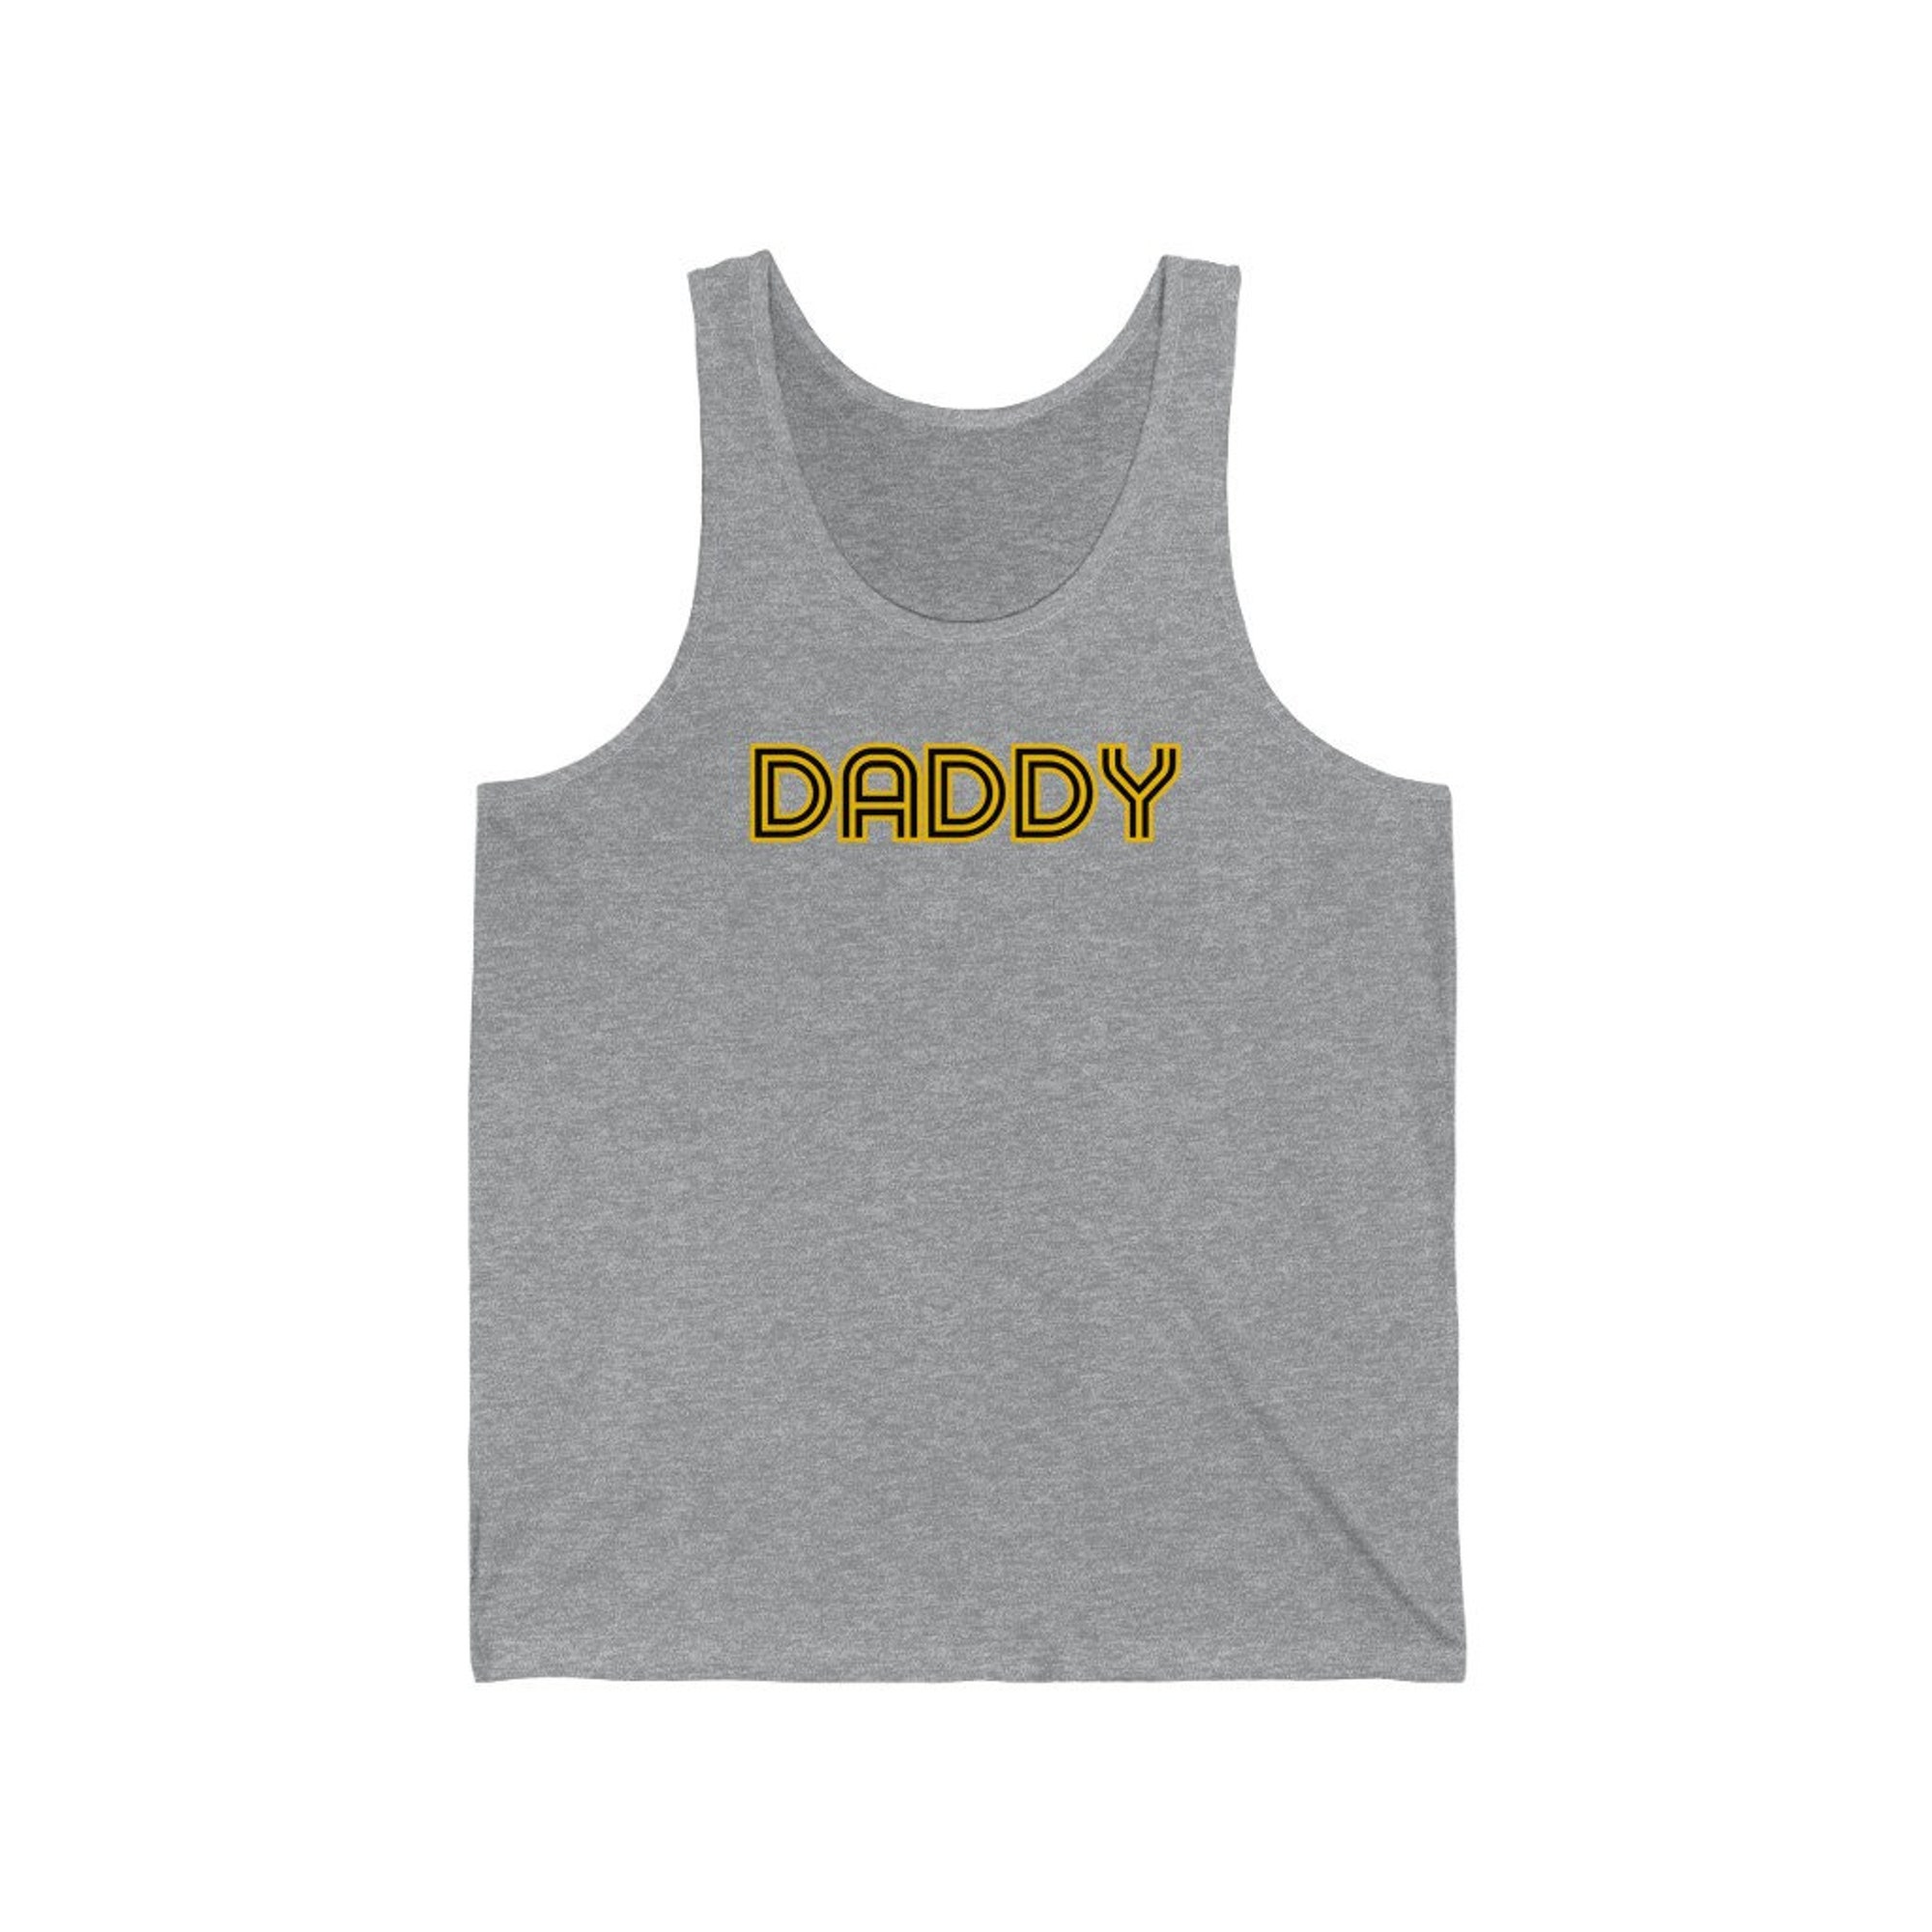 DAD Tank Top Retro Leather DADDY